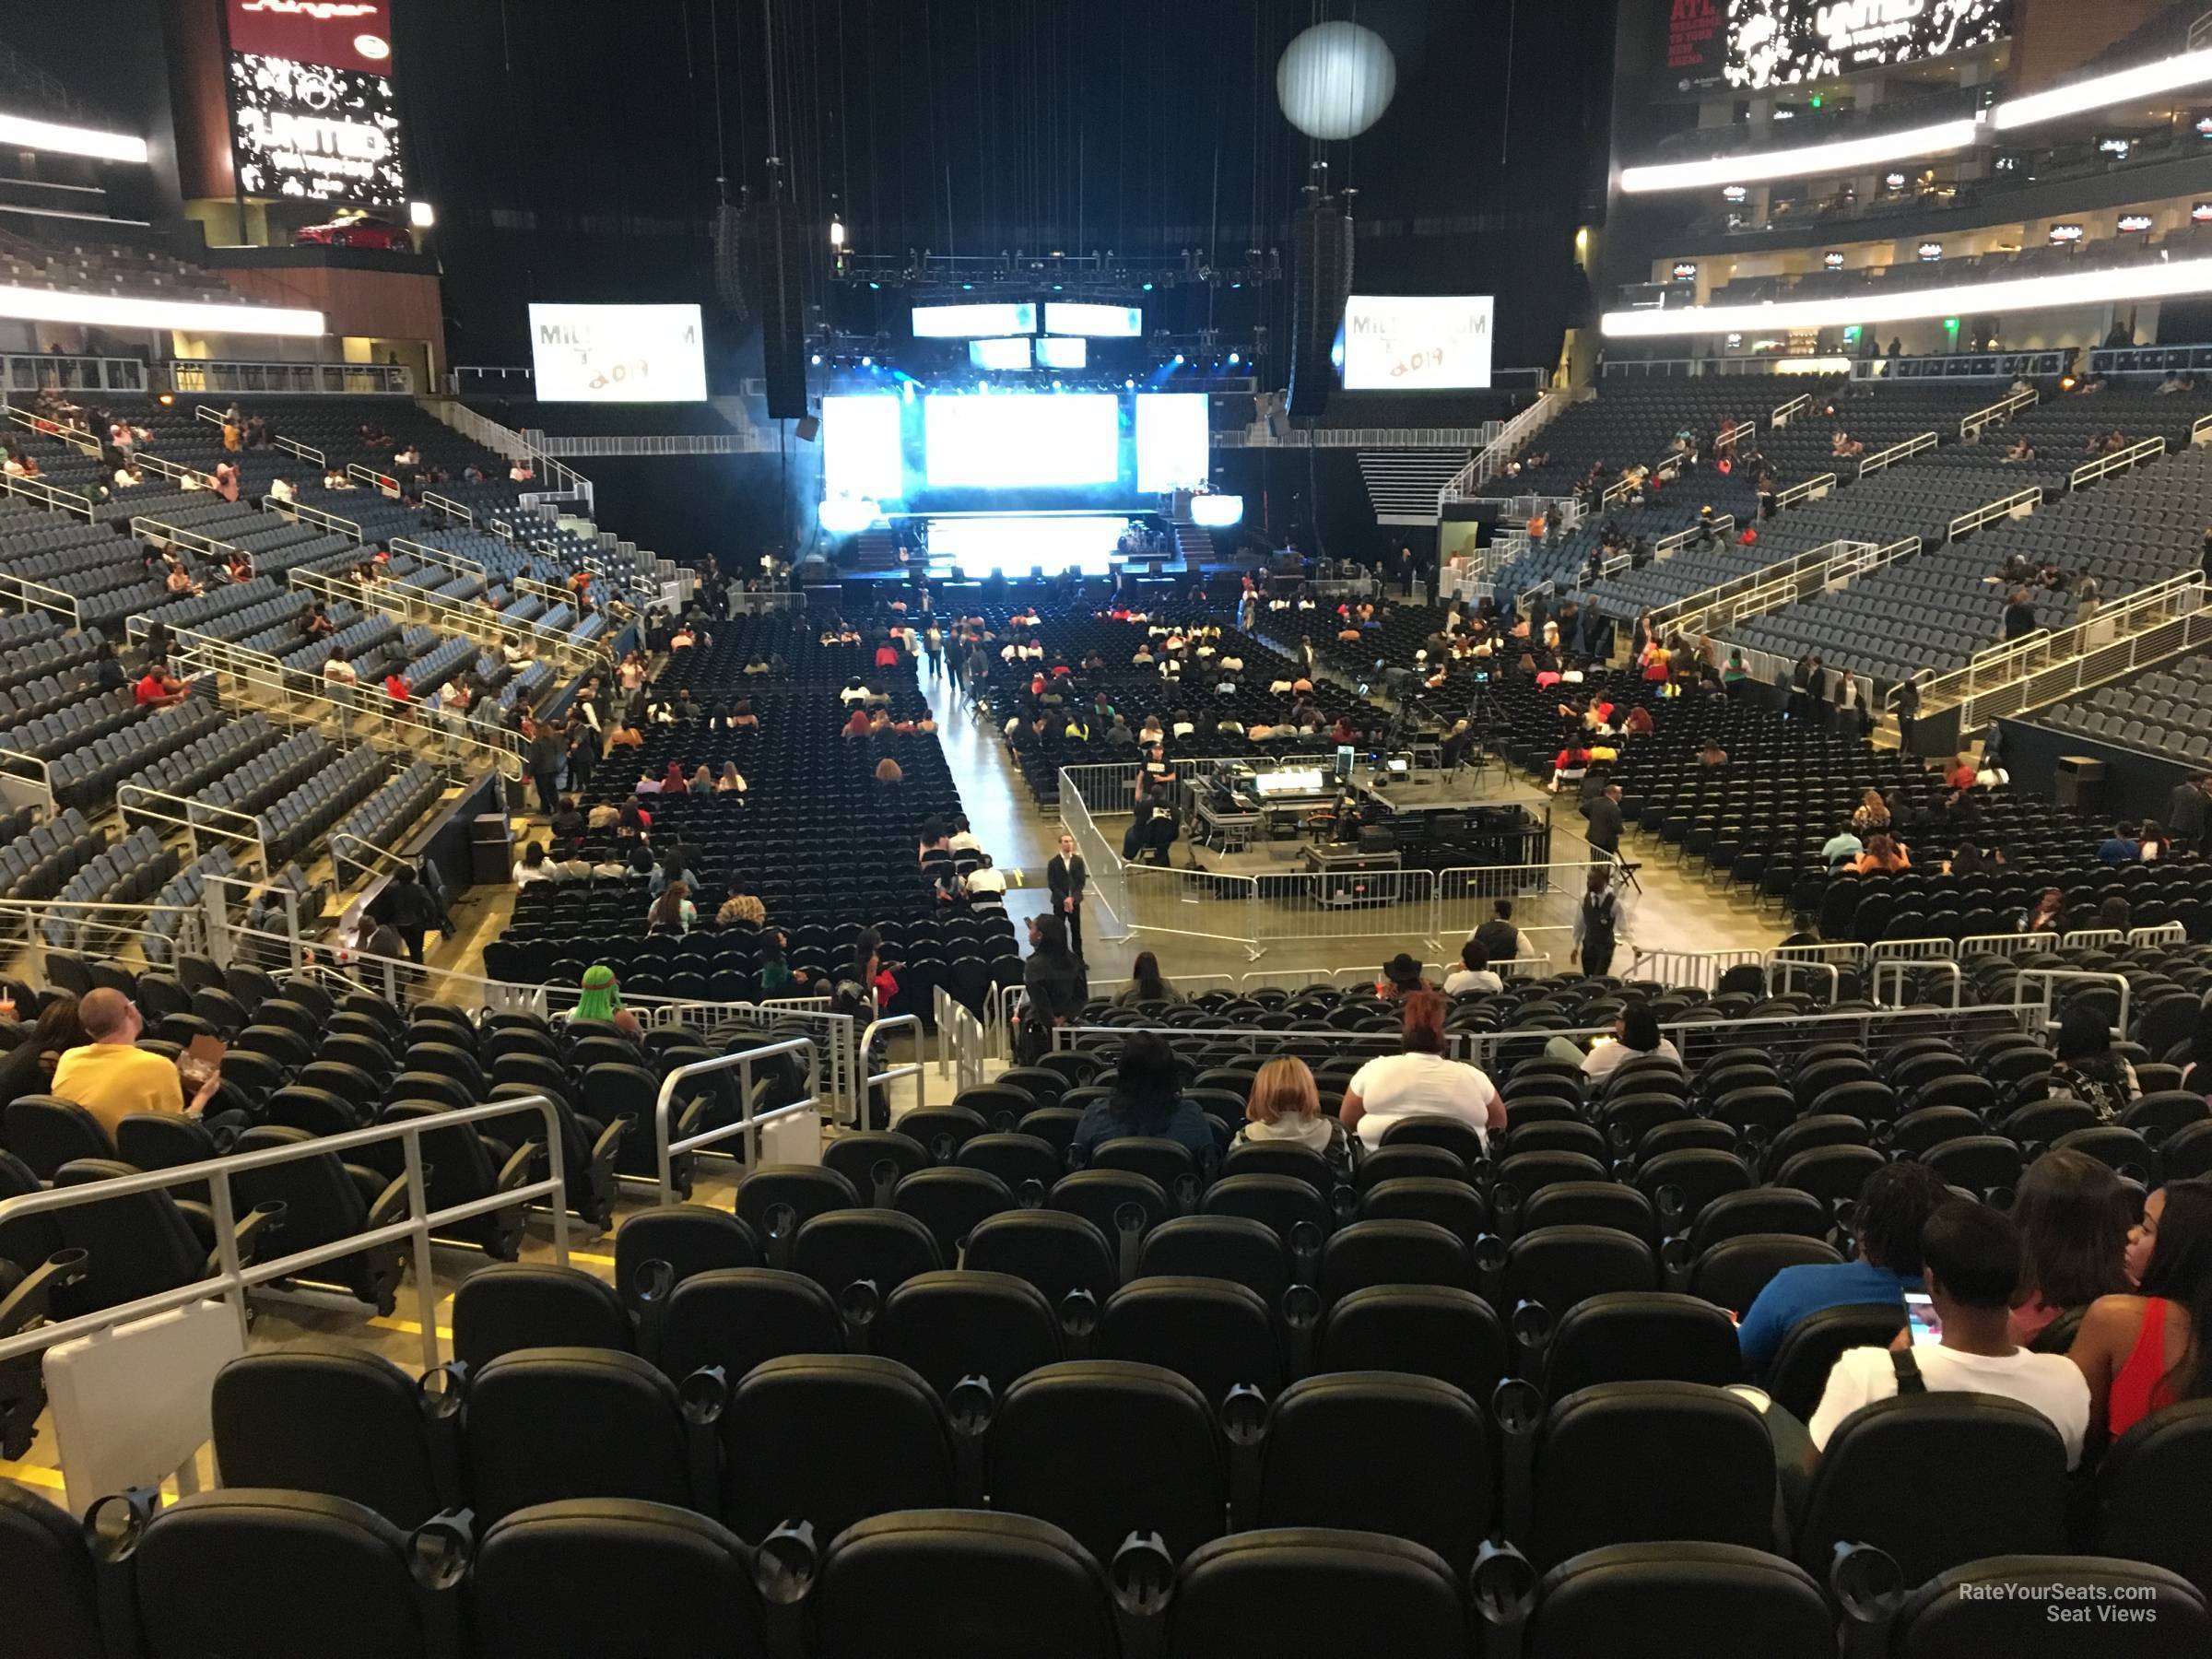 State Farm Arena Section 114 Concert Seating